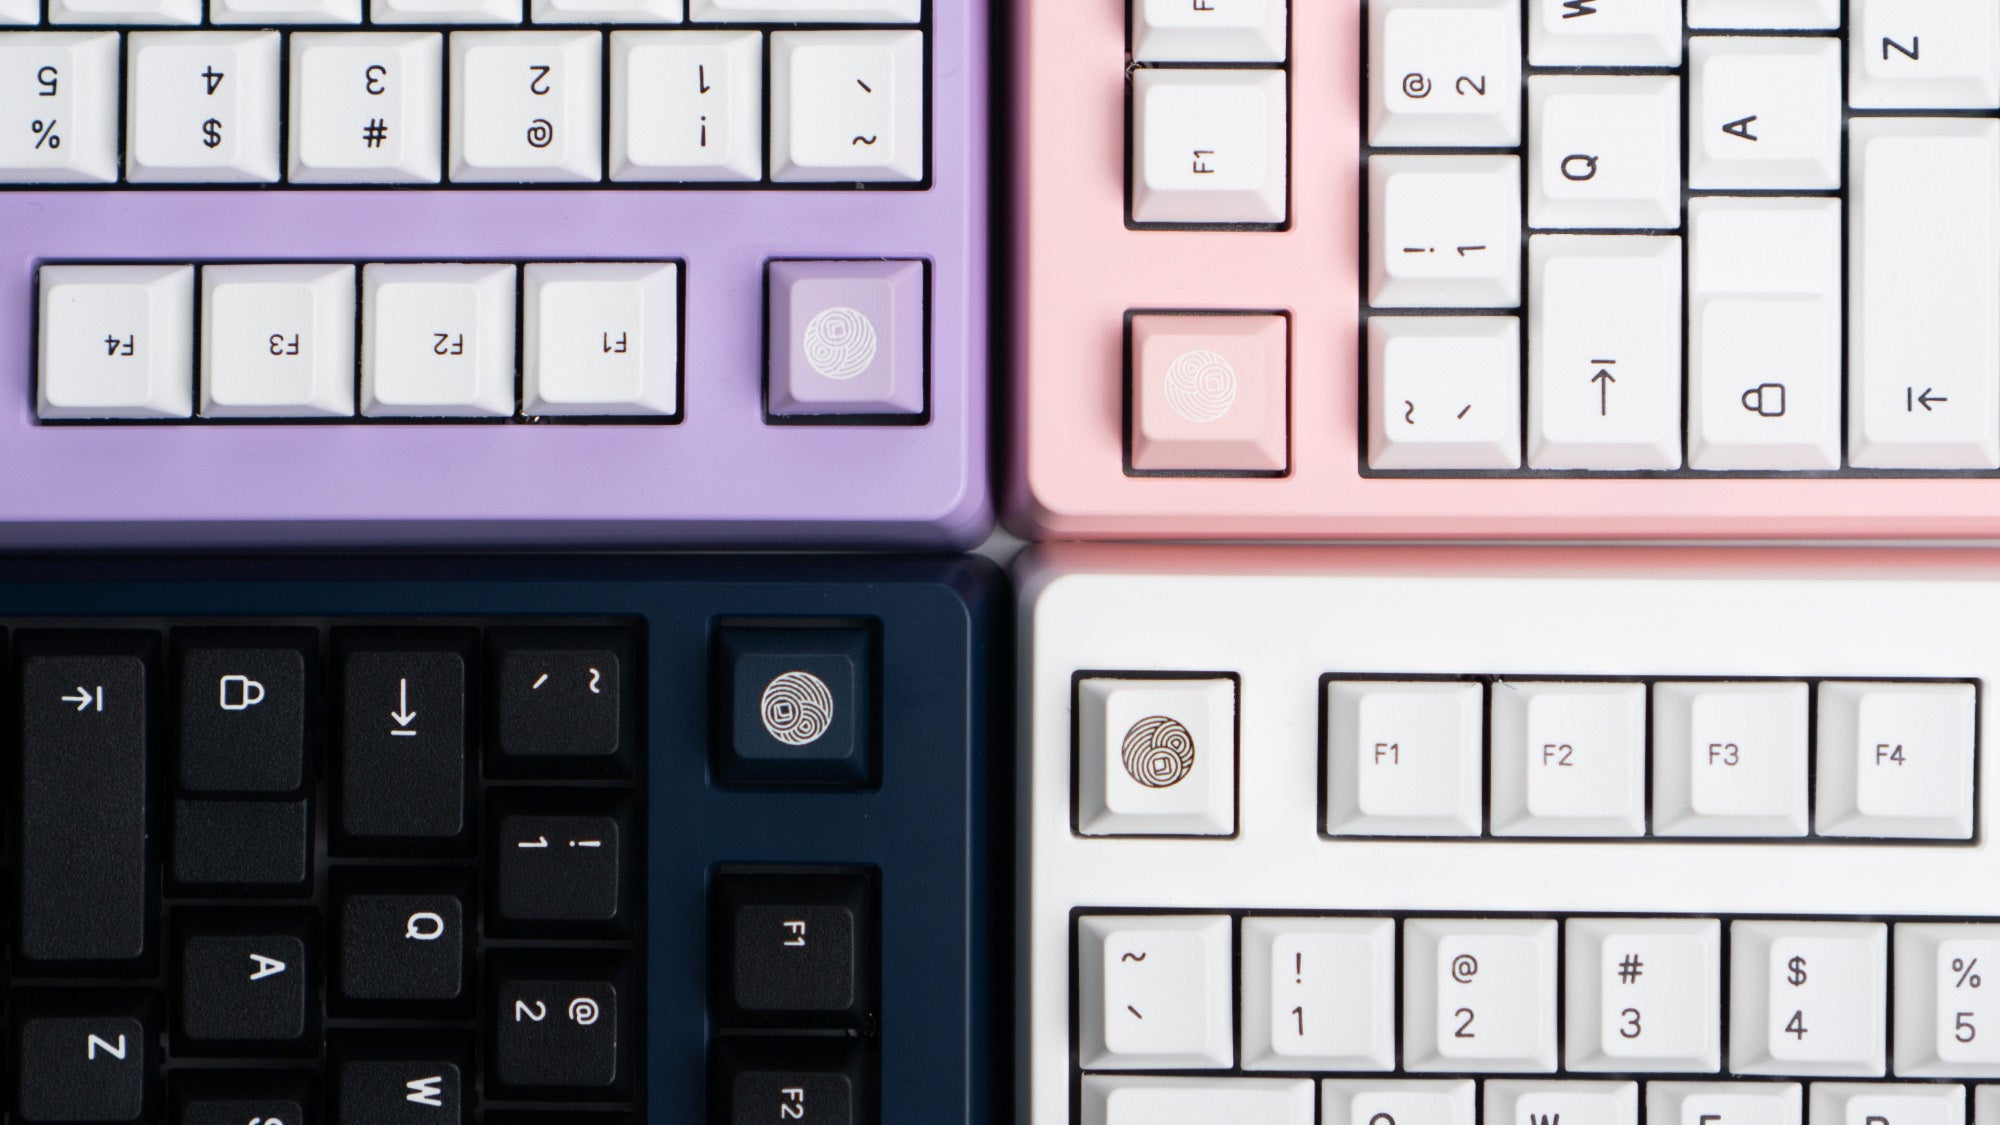 The four colors of the Monokei Standard keyboard